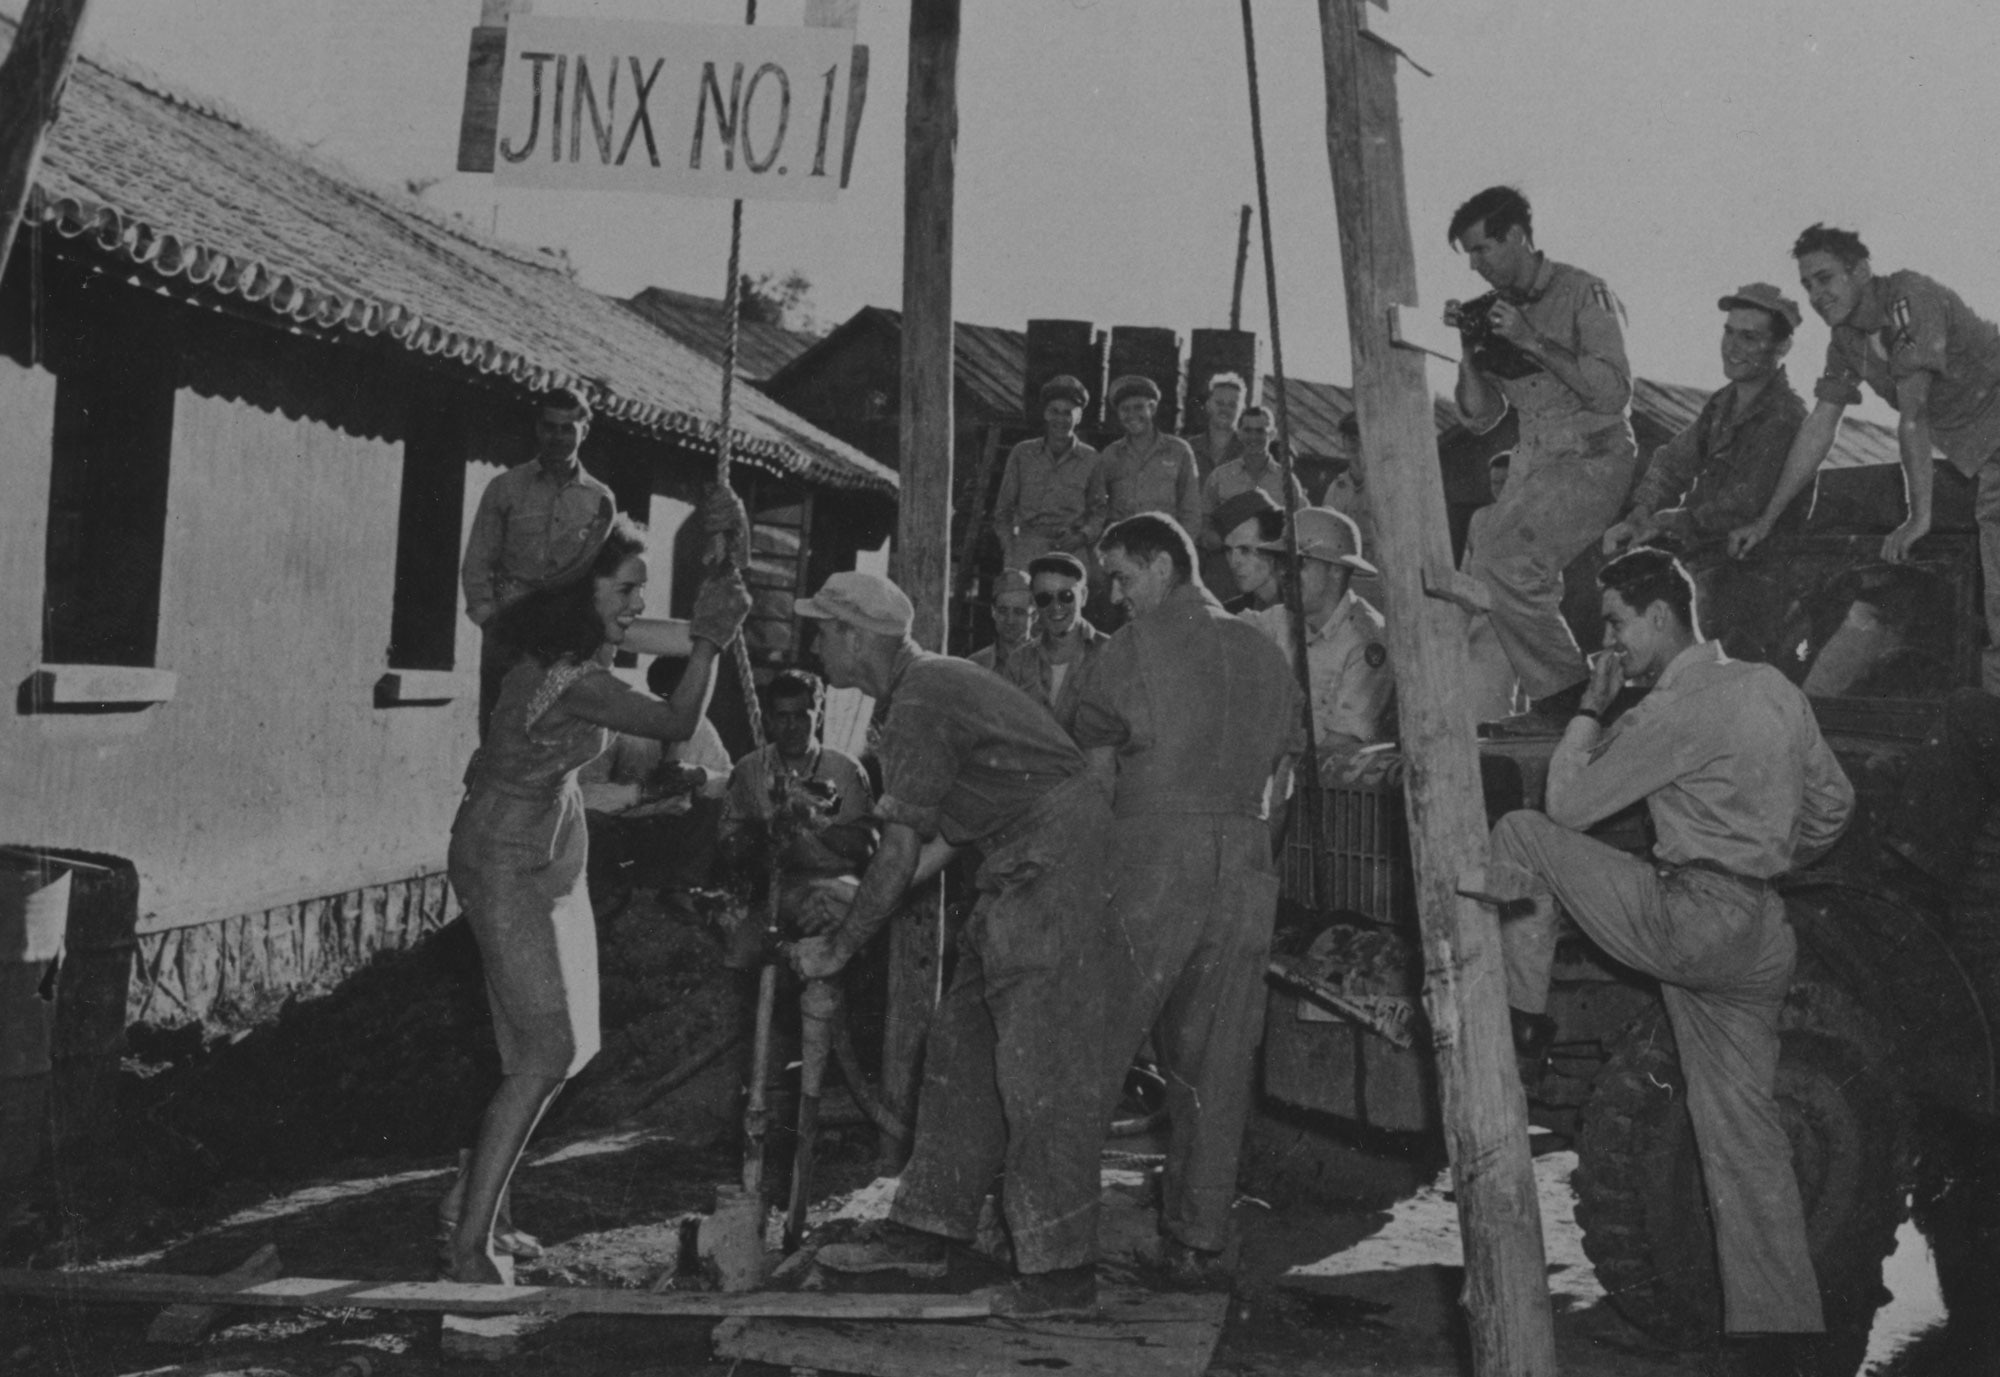 Squadron members happily receive help from Jinx on facility improvements in China during her USO tour to the CBI in late 1944.